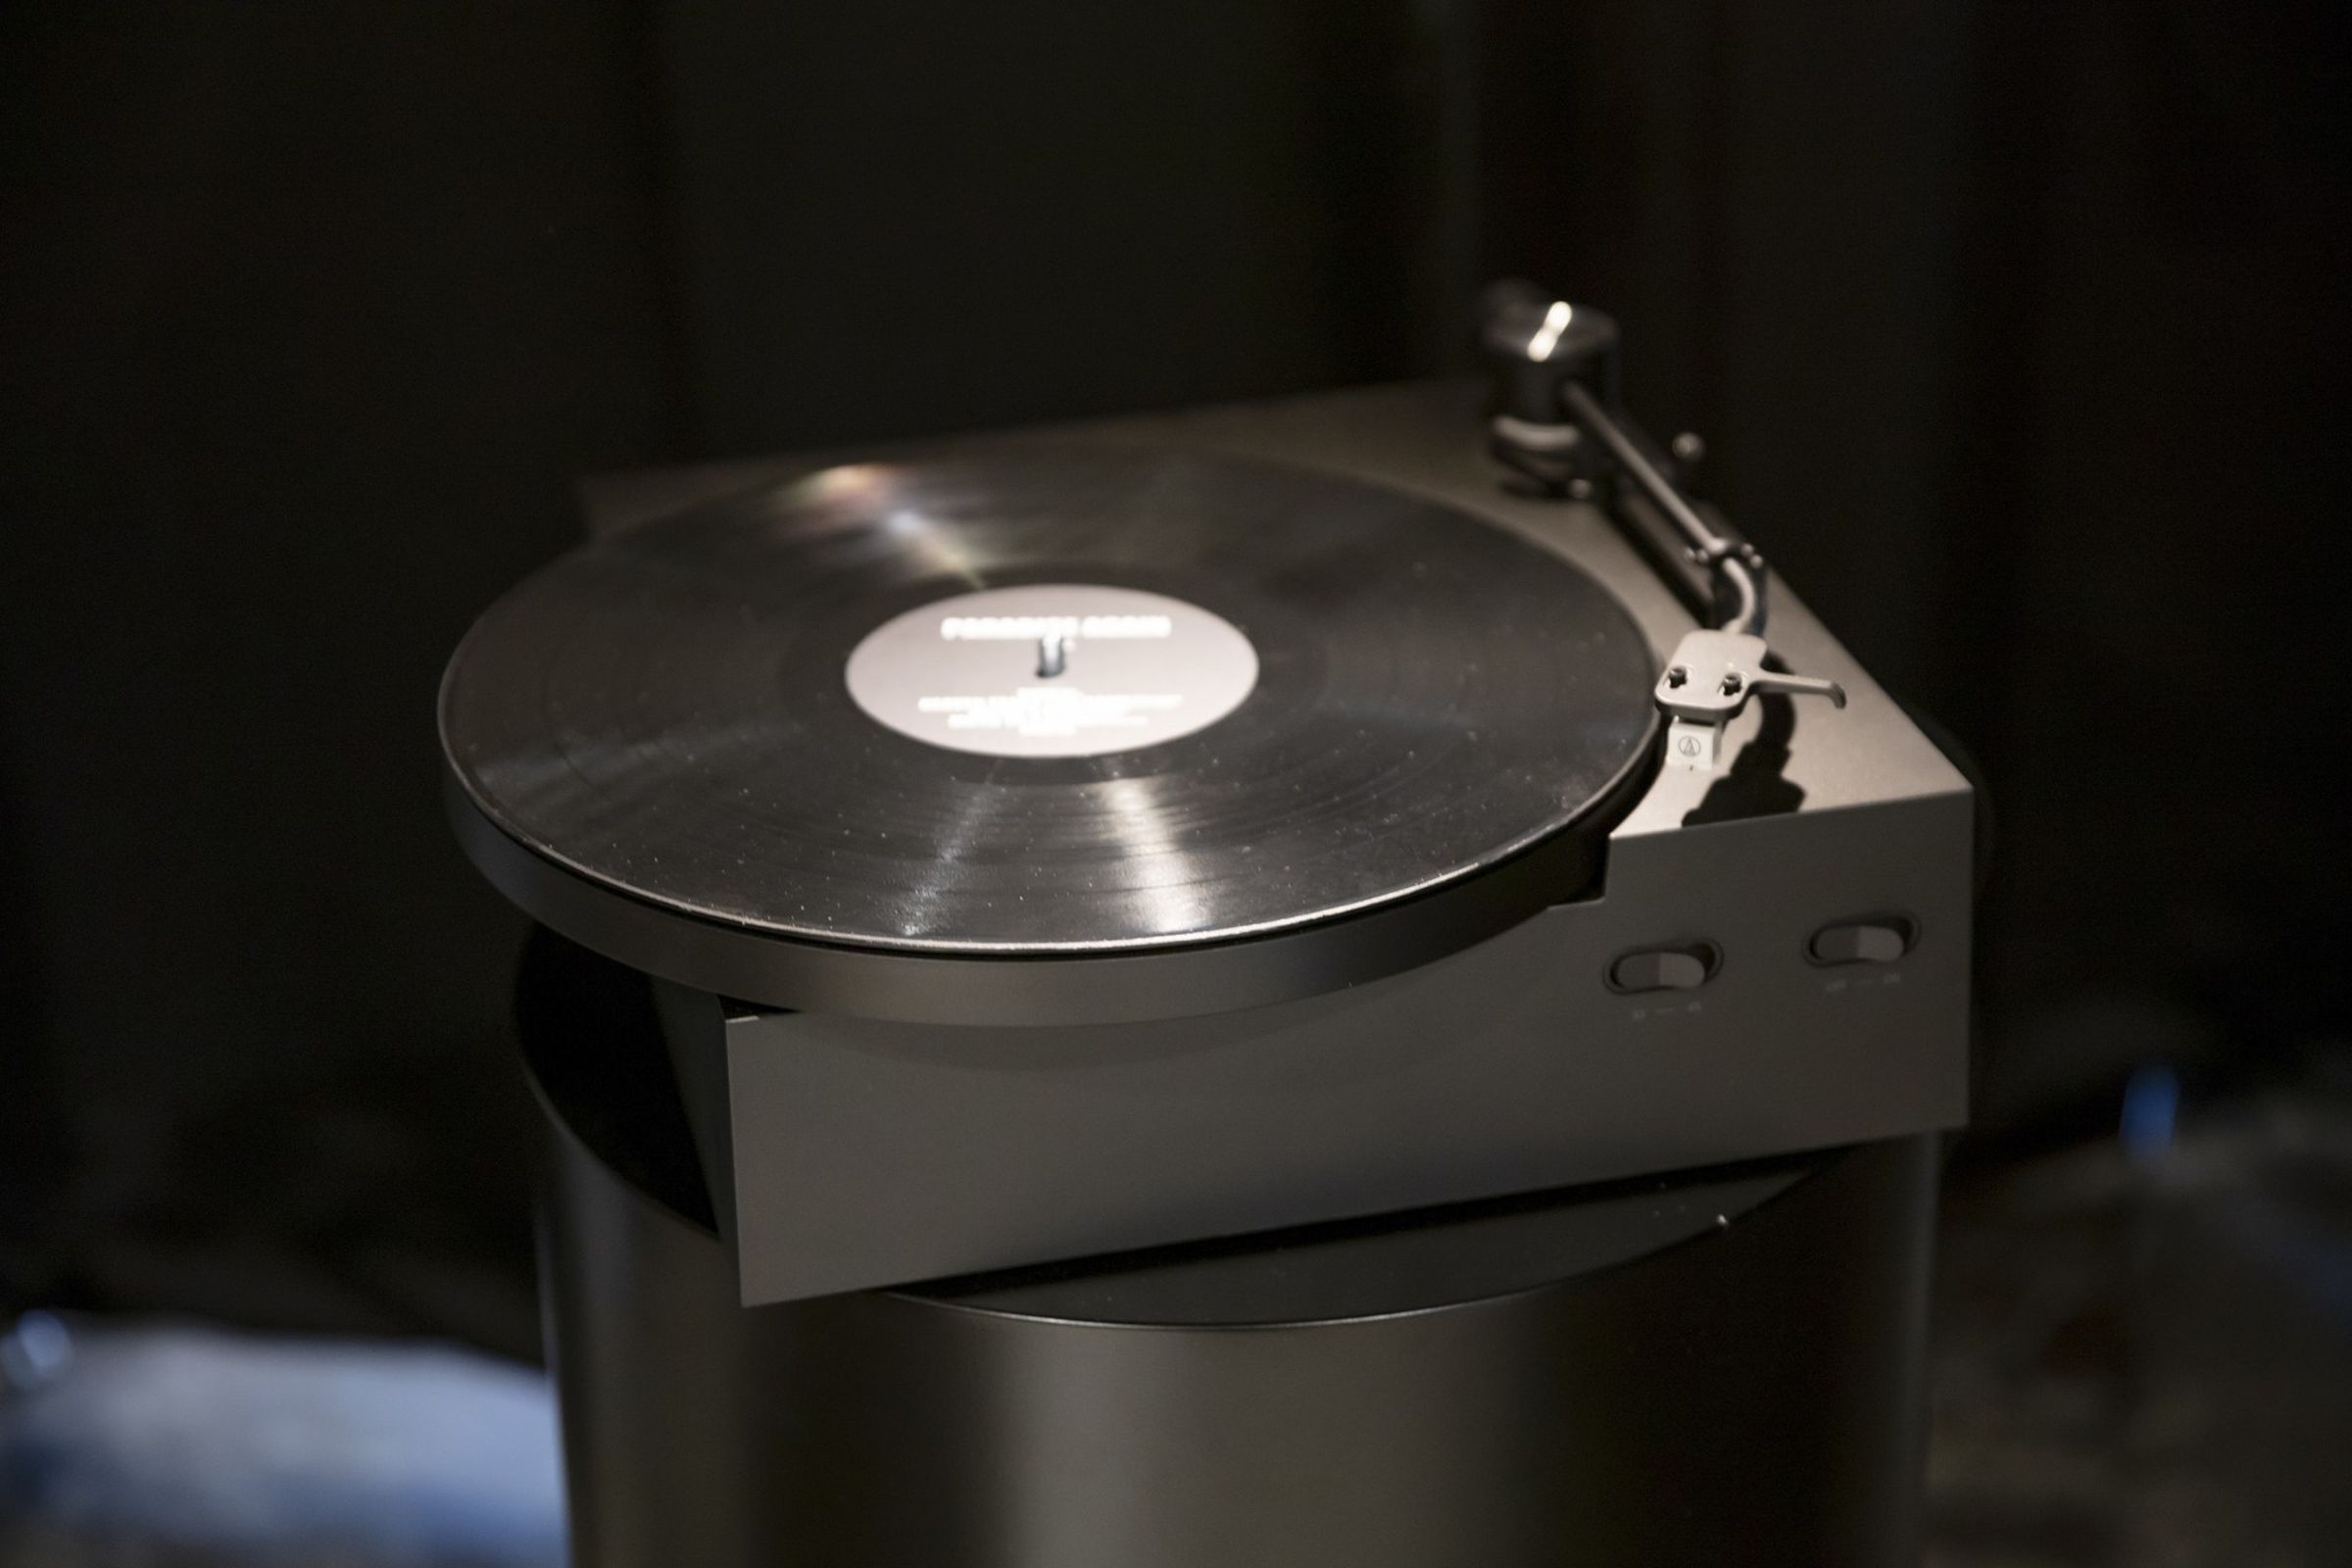 Ikea’s upcoming record player.